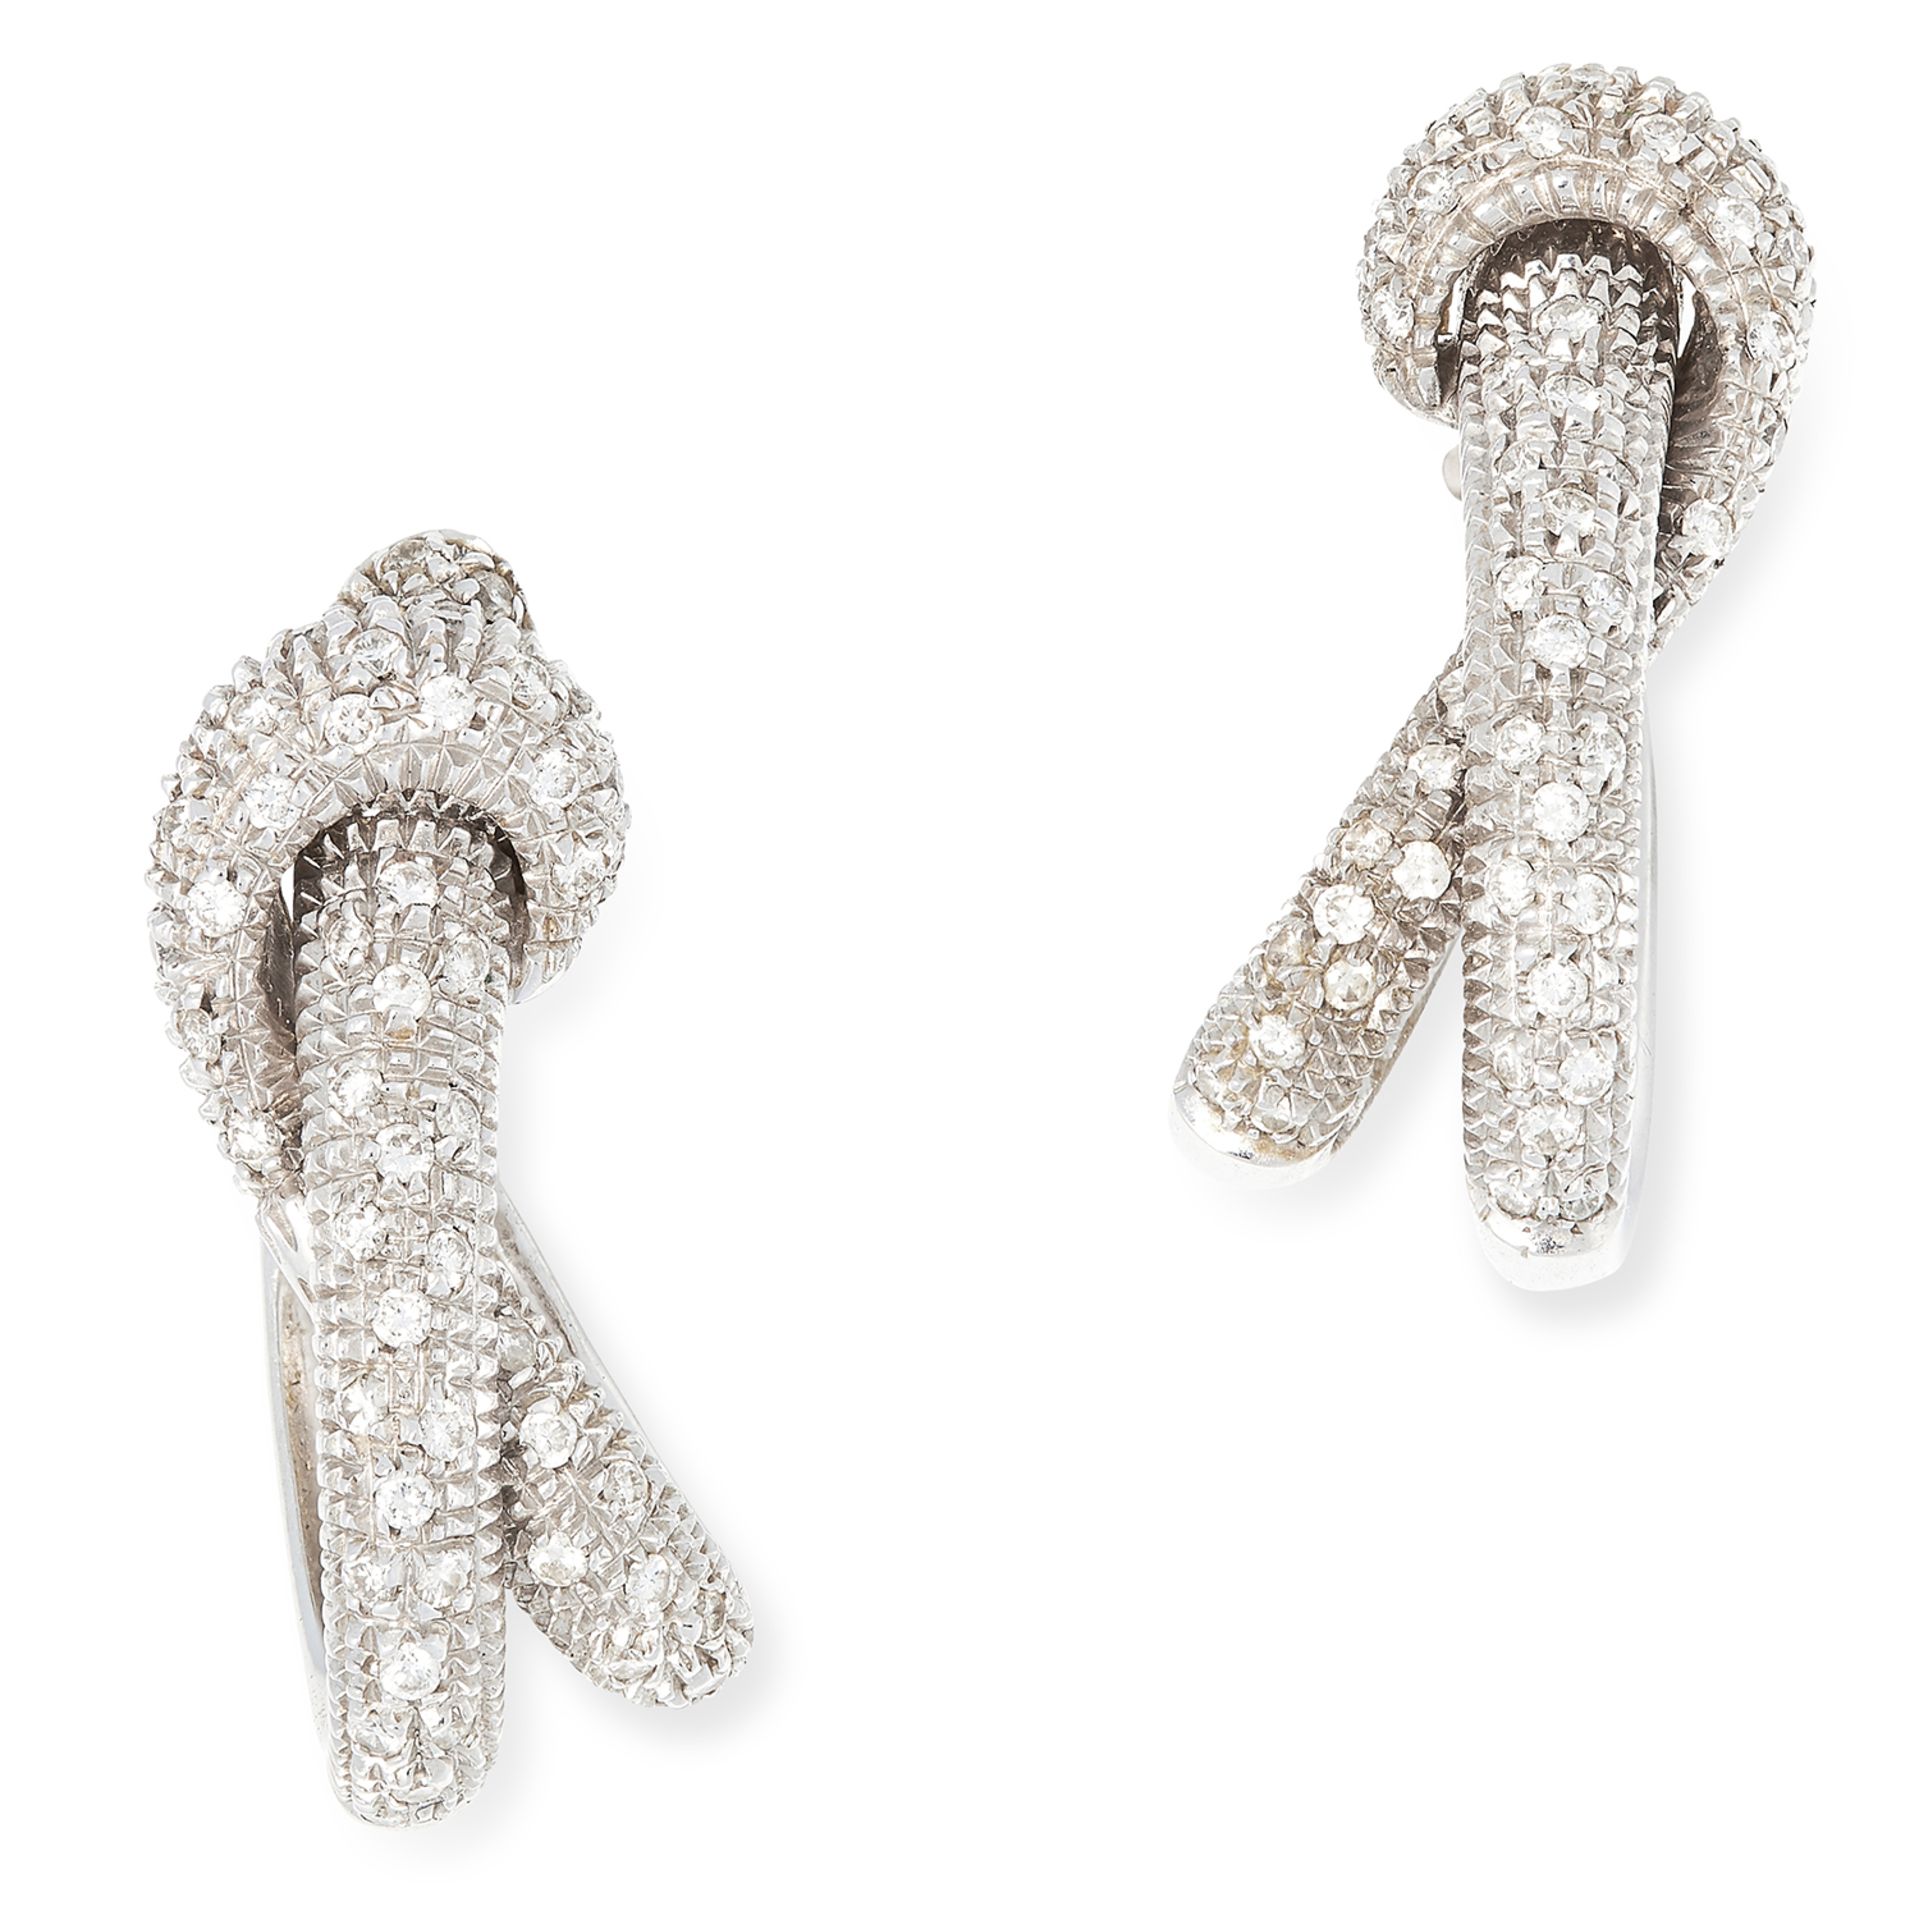 A PAIR OF DIAMOND HOOP EARRINGS in abstract twisted form set with round cut diamonds, 2.3cm, 13.8g.